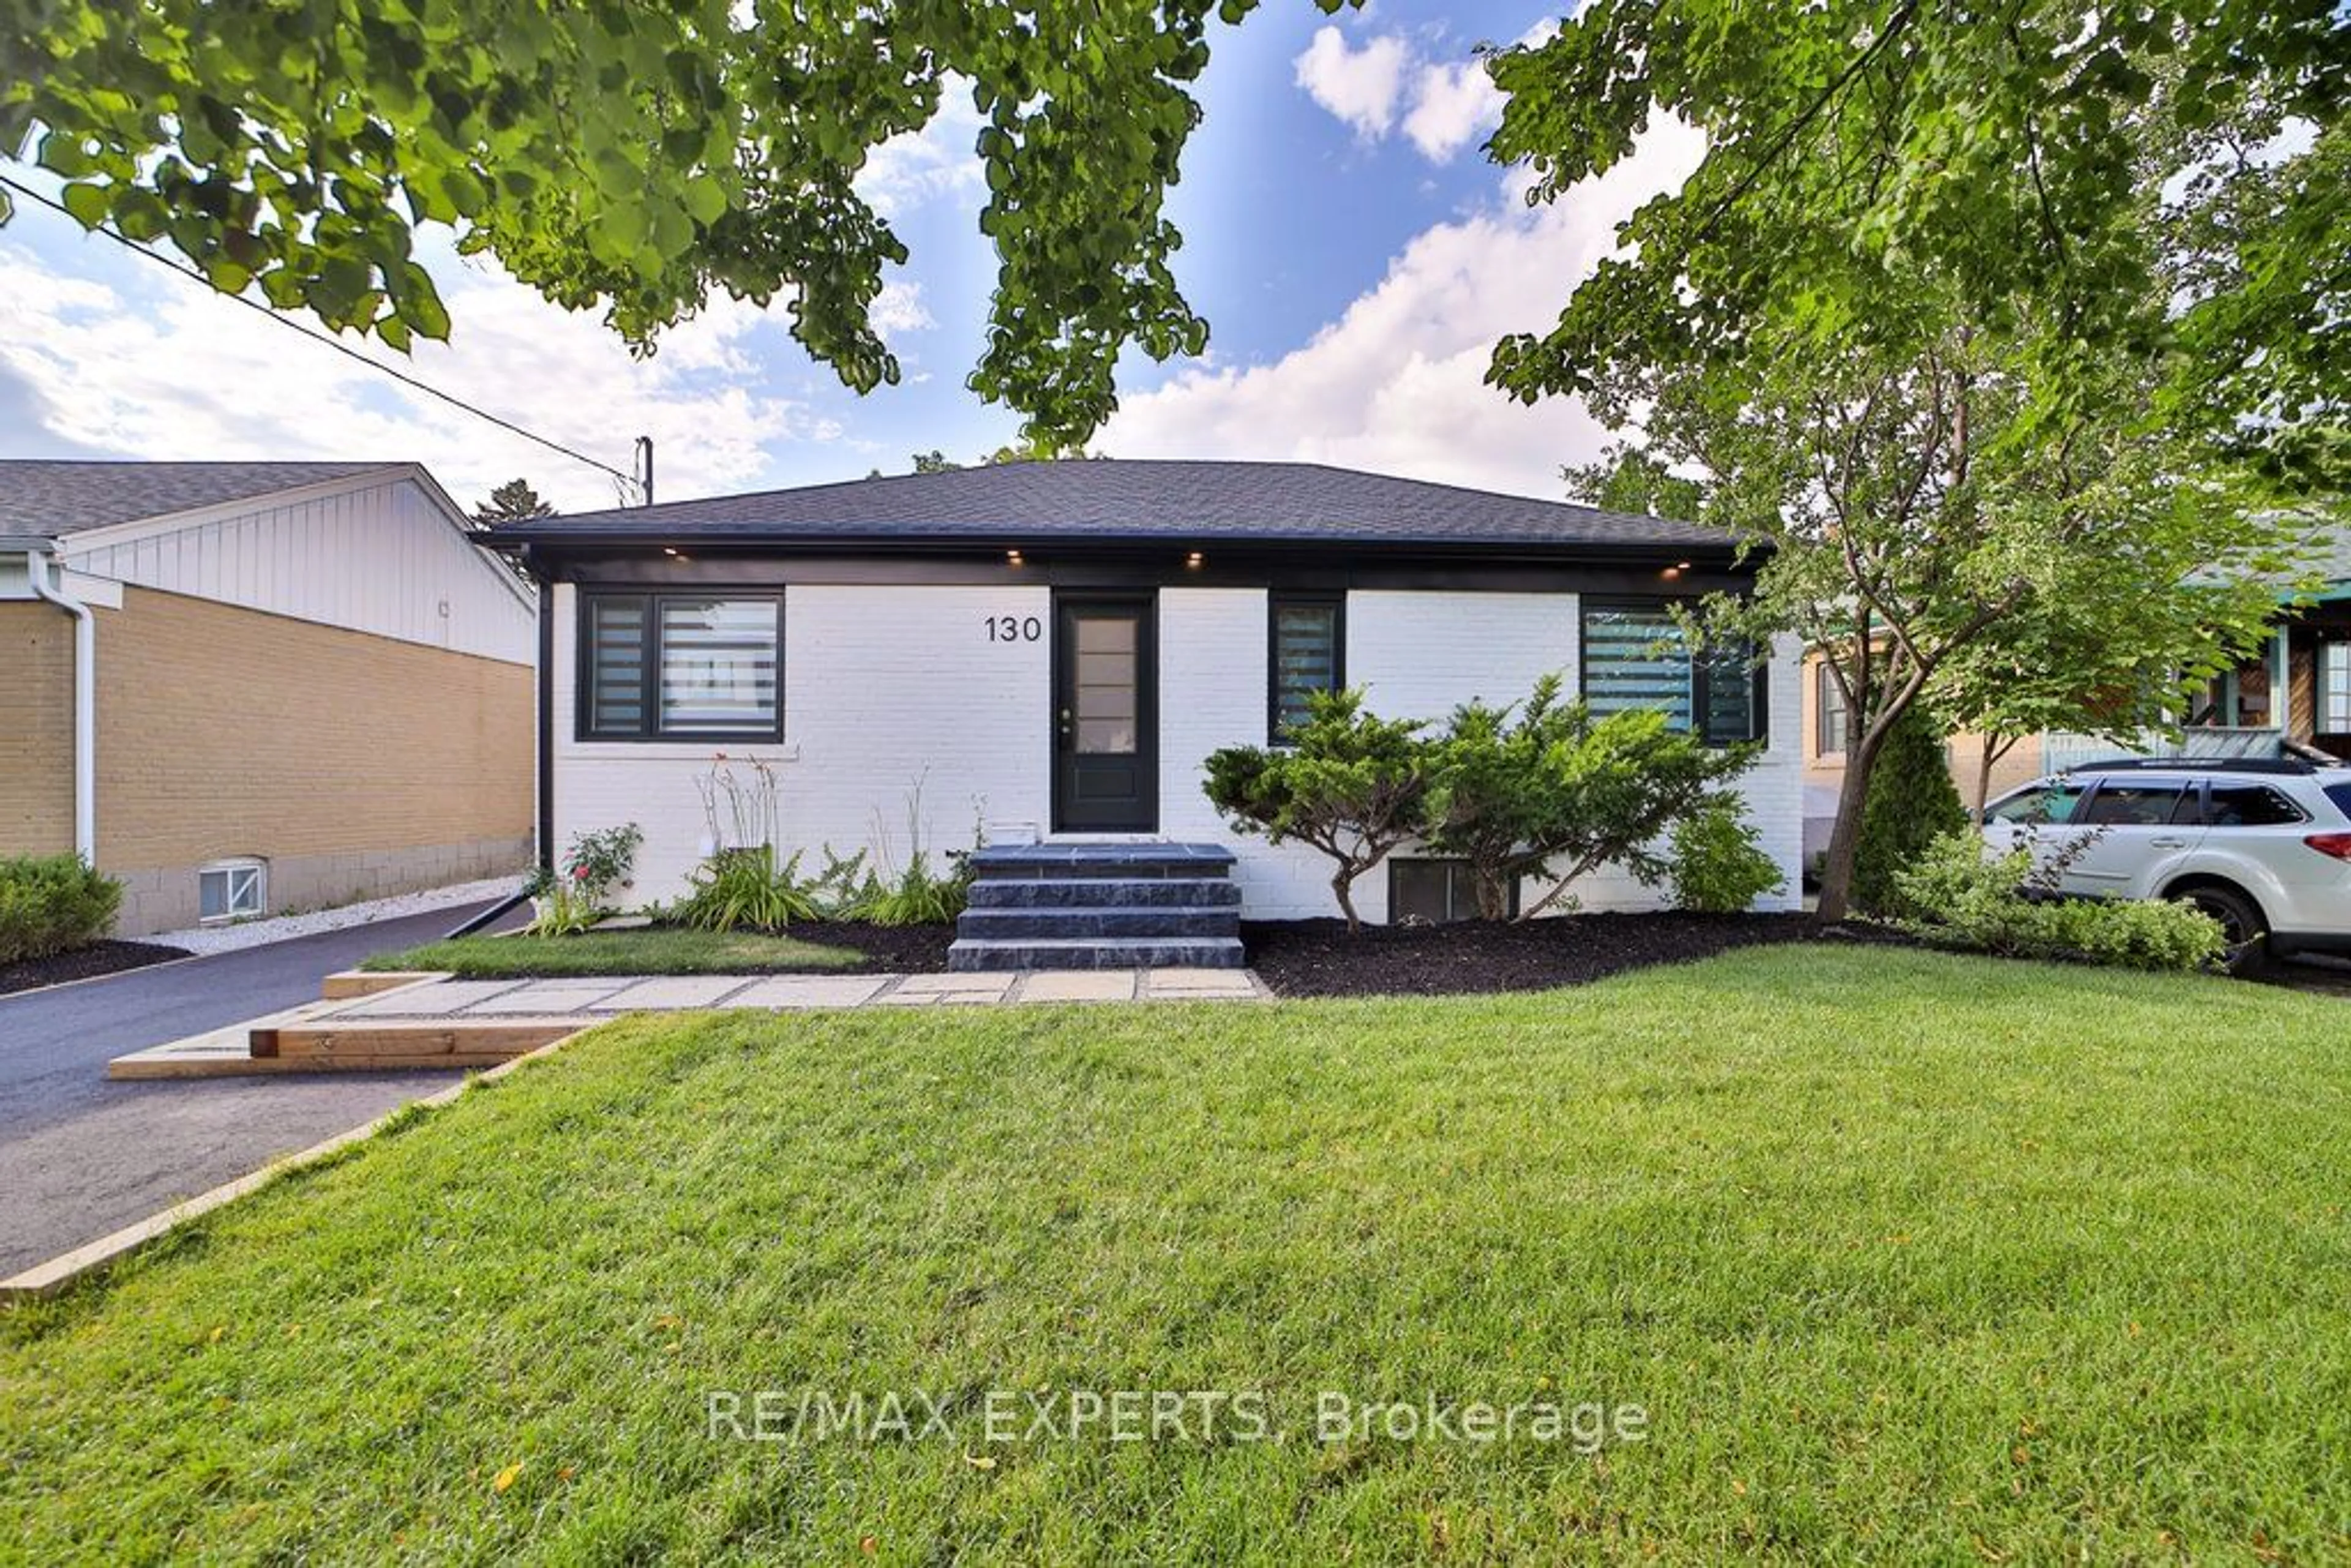 Frontside or backside of a home for 130 Calvington Dr, Toronto Ontario M3M 2M4